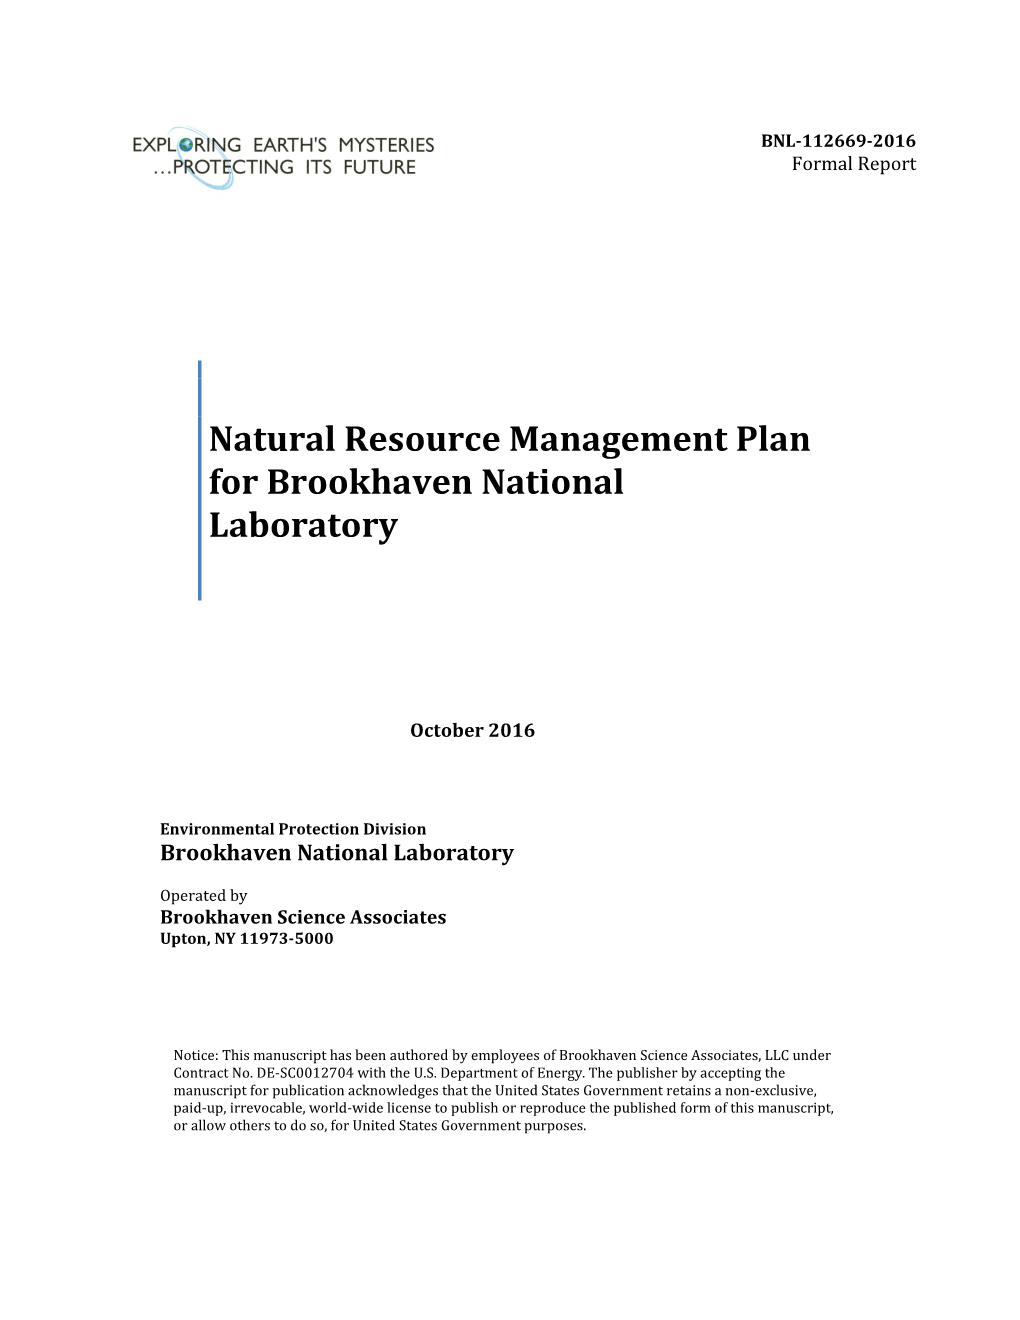 Natural Resource Management Plan for Brookhaven National Laboratory